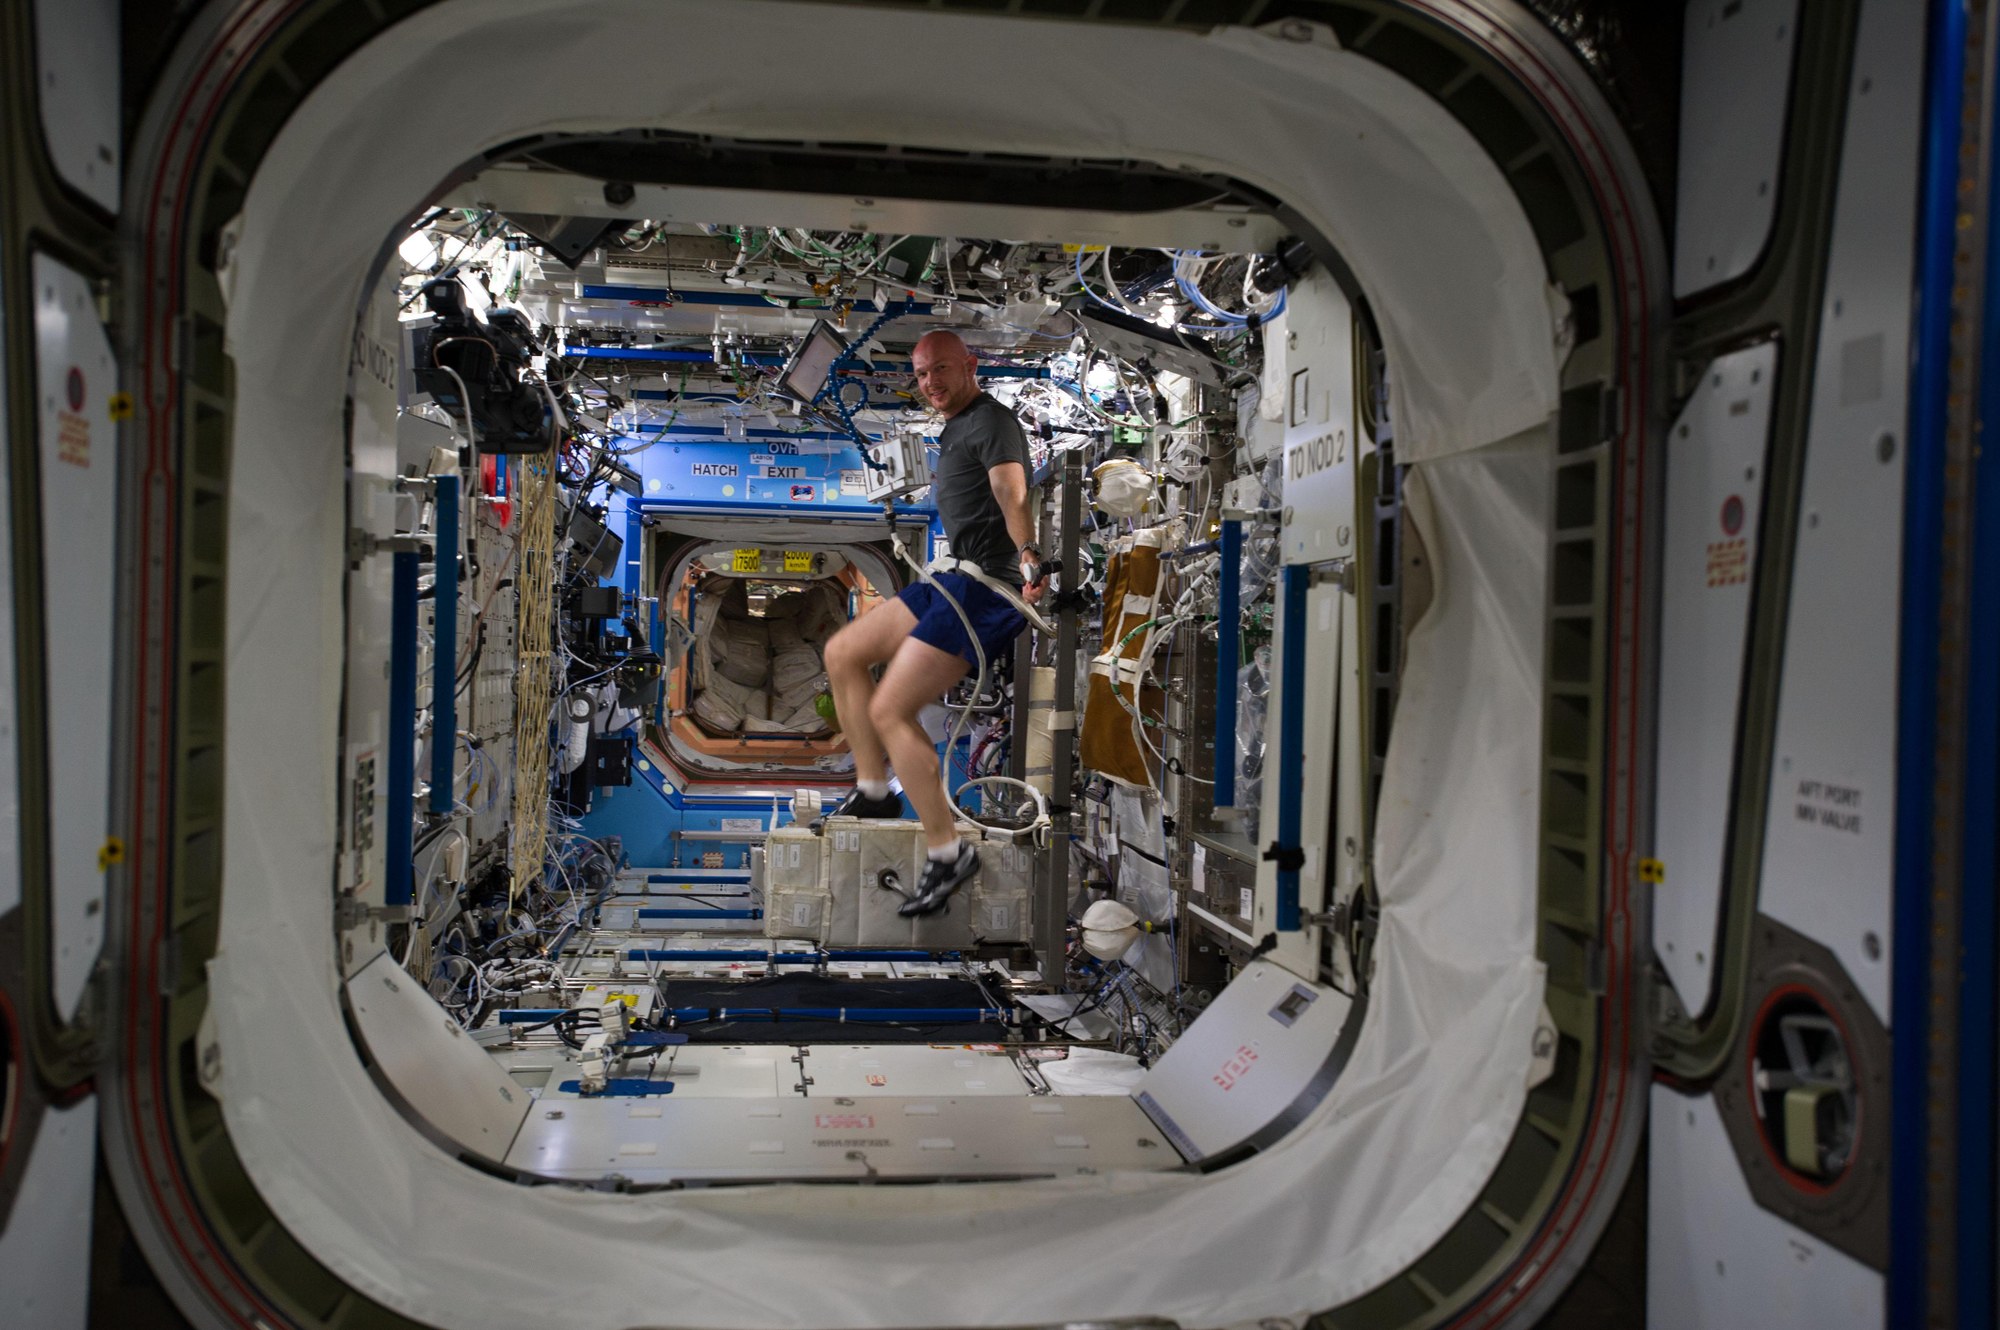 Training in space